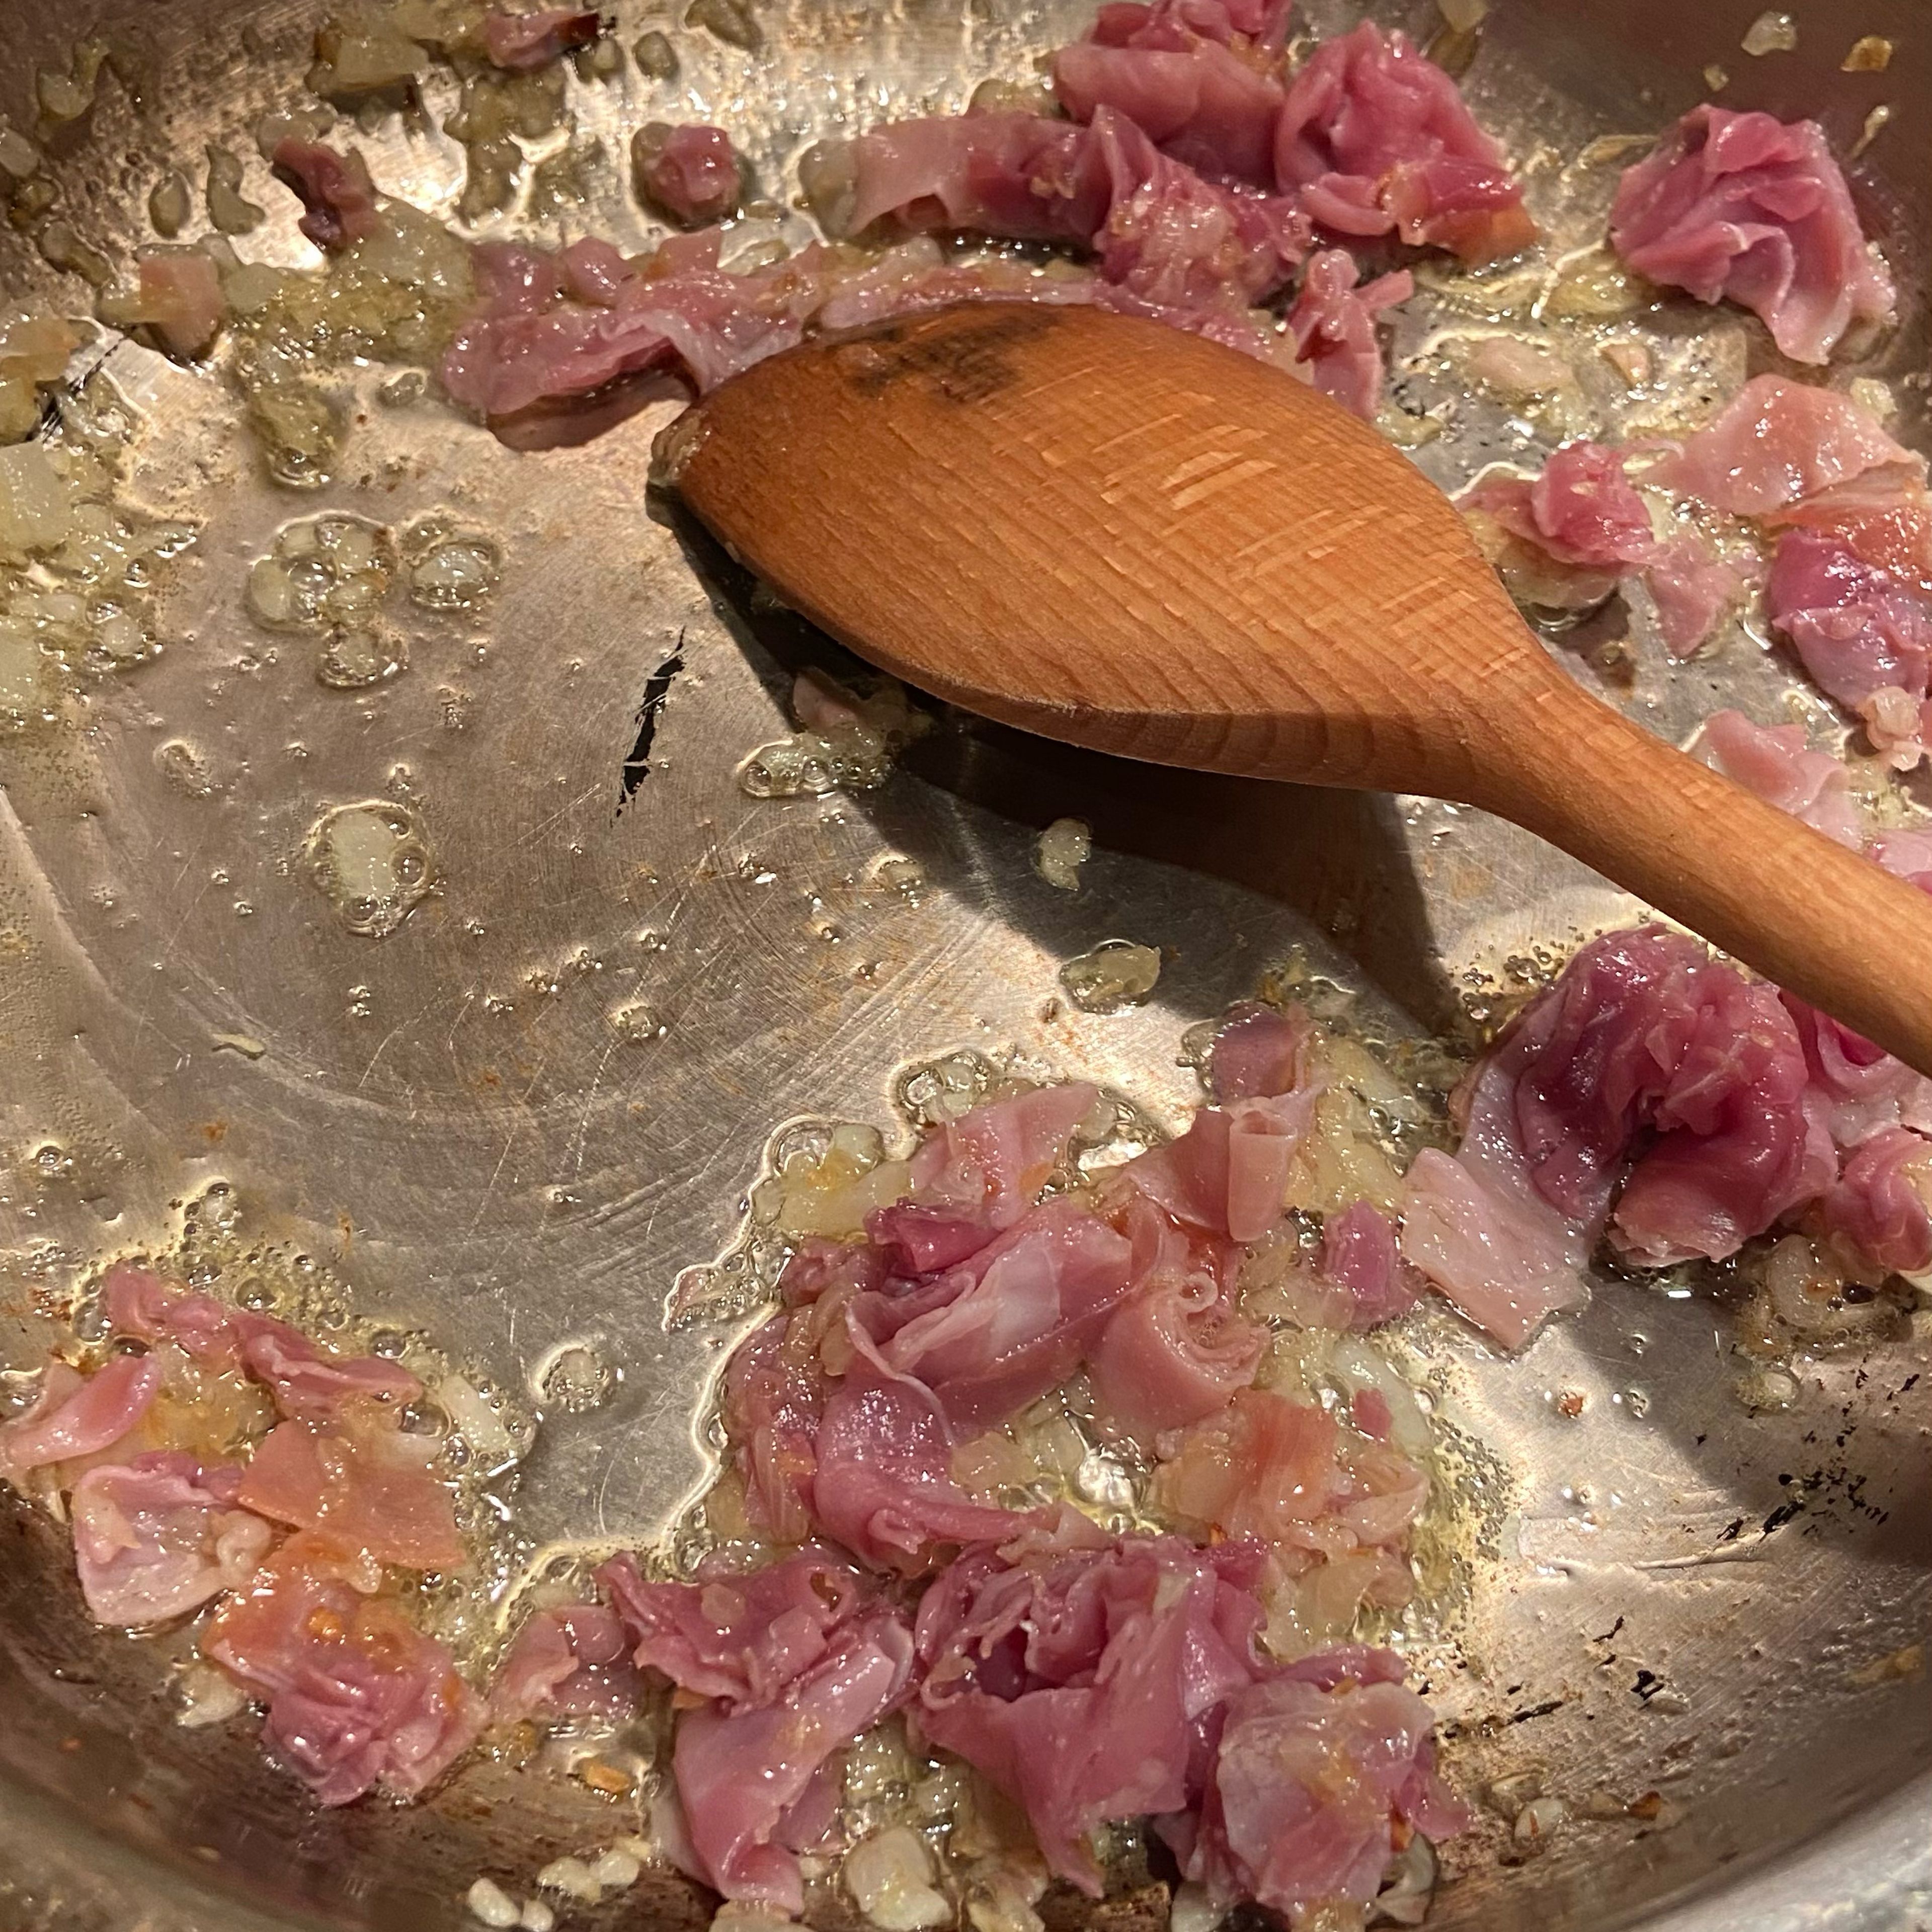 Add the prosciutto and turn the heat down low. And gently move in around the pan. You’re not frying it as such, just letting the fats and salts melt into the butter.